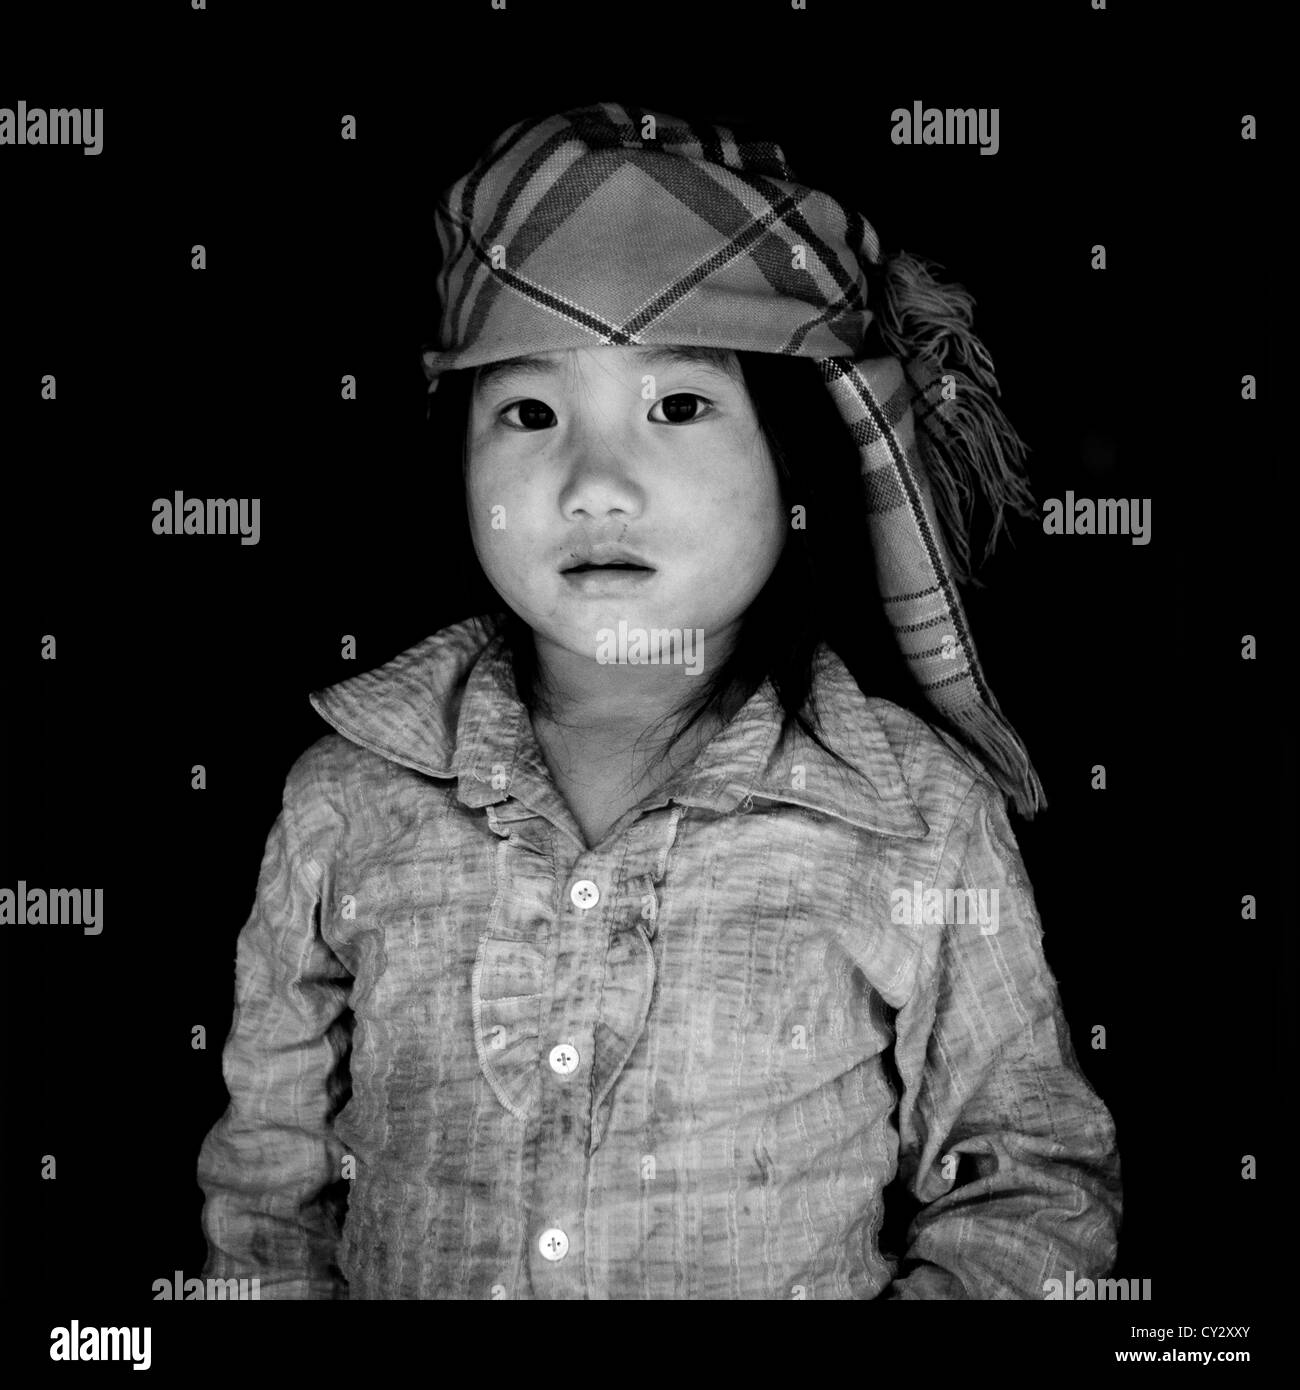 Young Flower Hmong Girl With A Headscarf, Sapa, Vietnam Stock Photo